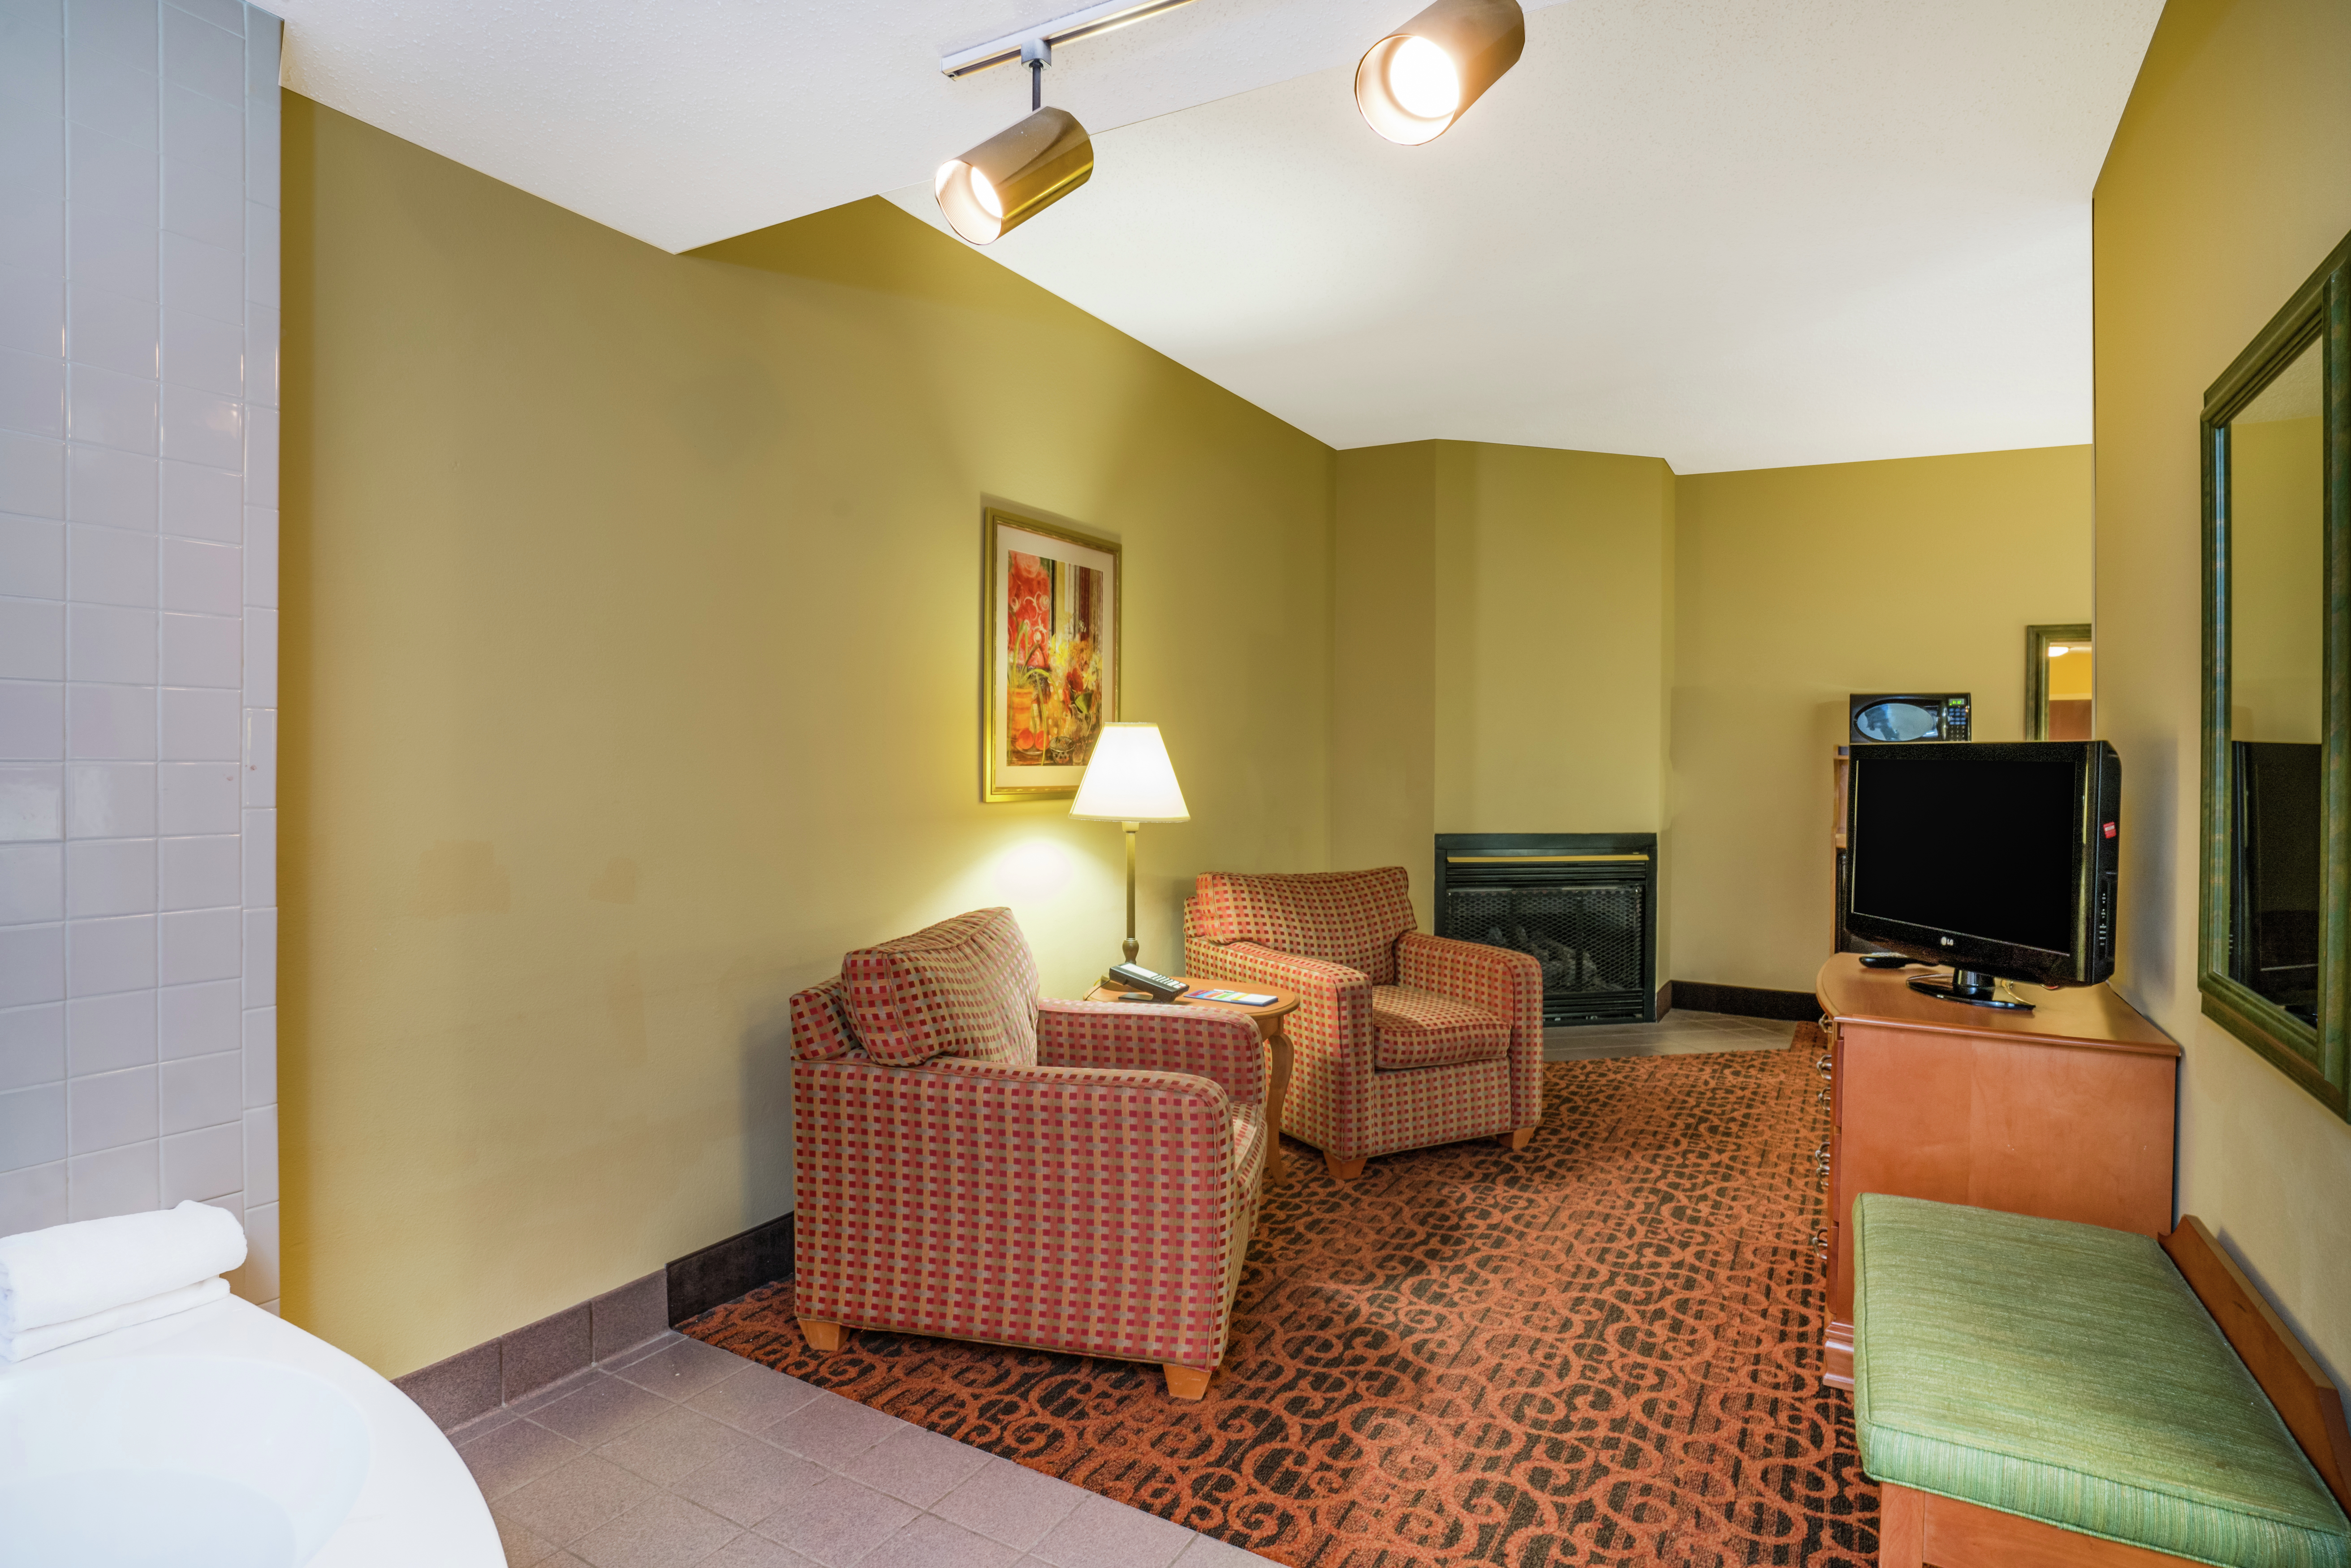 King Suite with Lounge Area, TV, and Fireplace